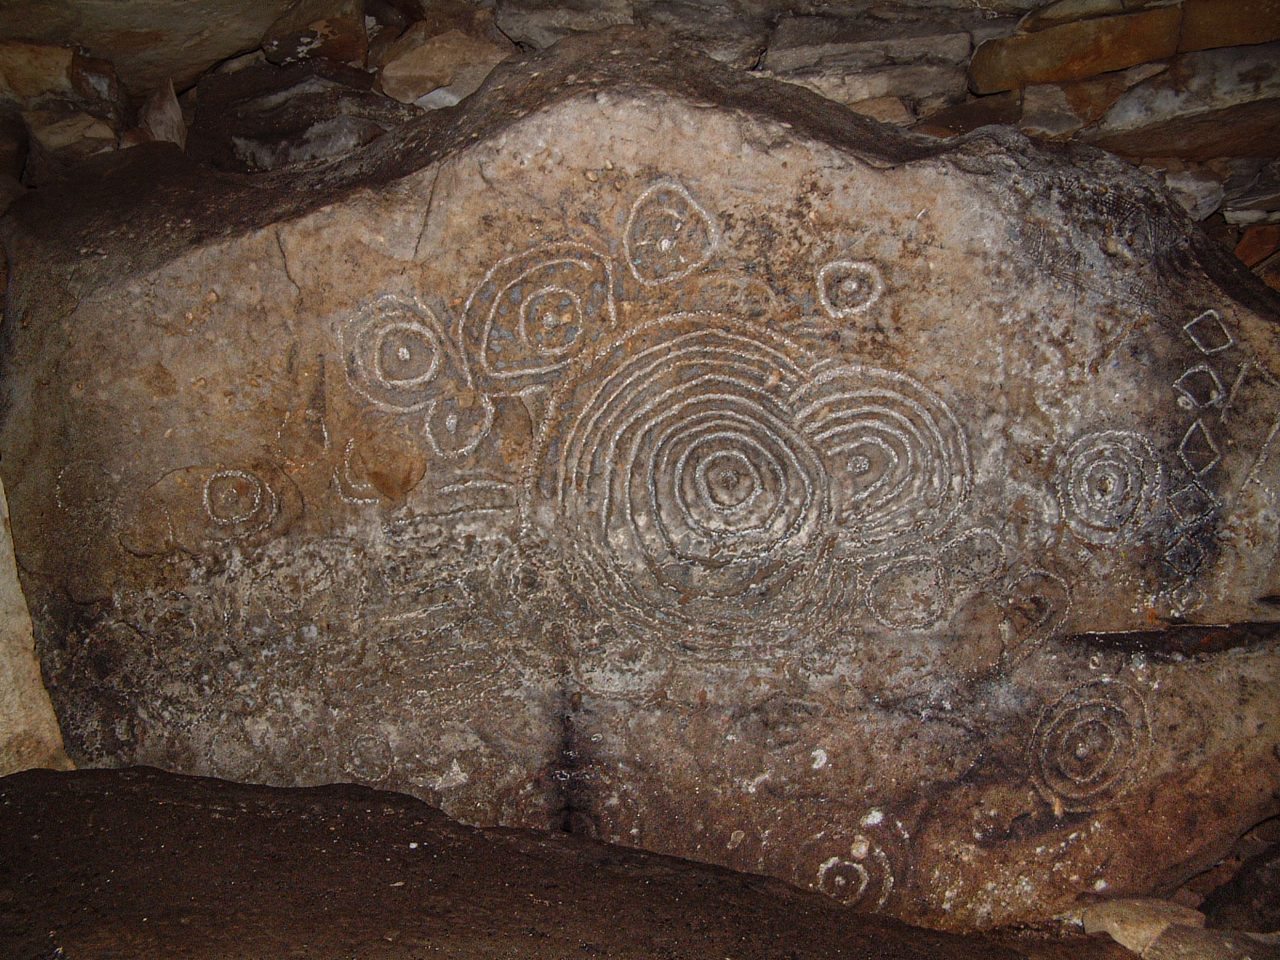 Eclipse art or something else? A collection of concentric circles on stone C16, part of a Neolithic tomb in Ireland, were carved around 5,000 years ago, and their true meaning has been lost to time.